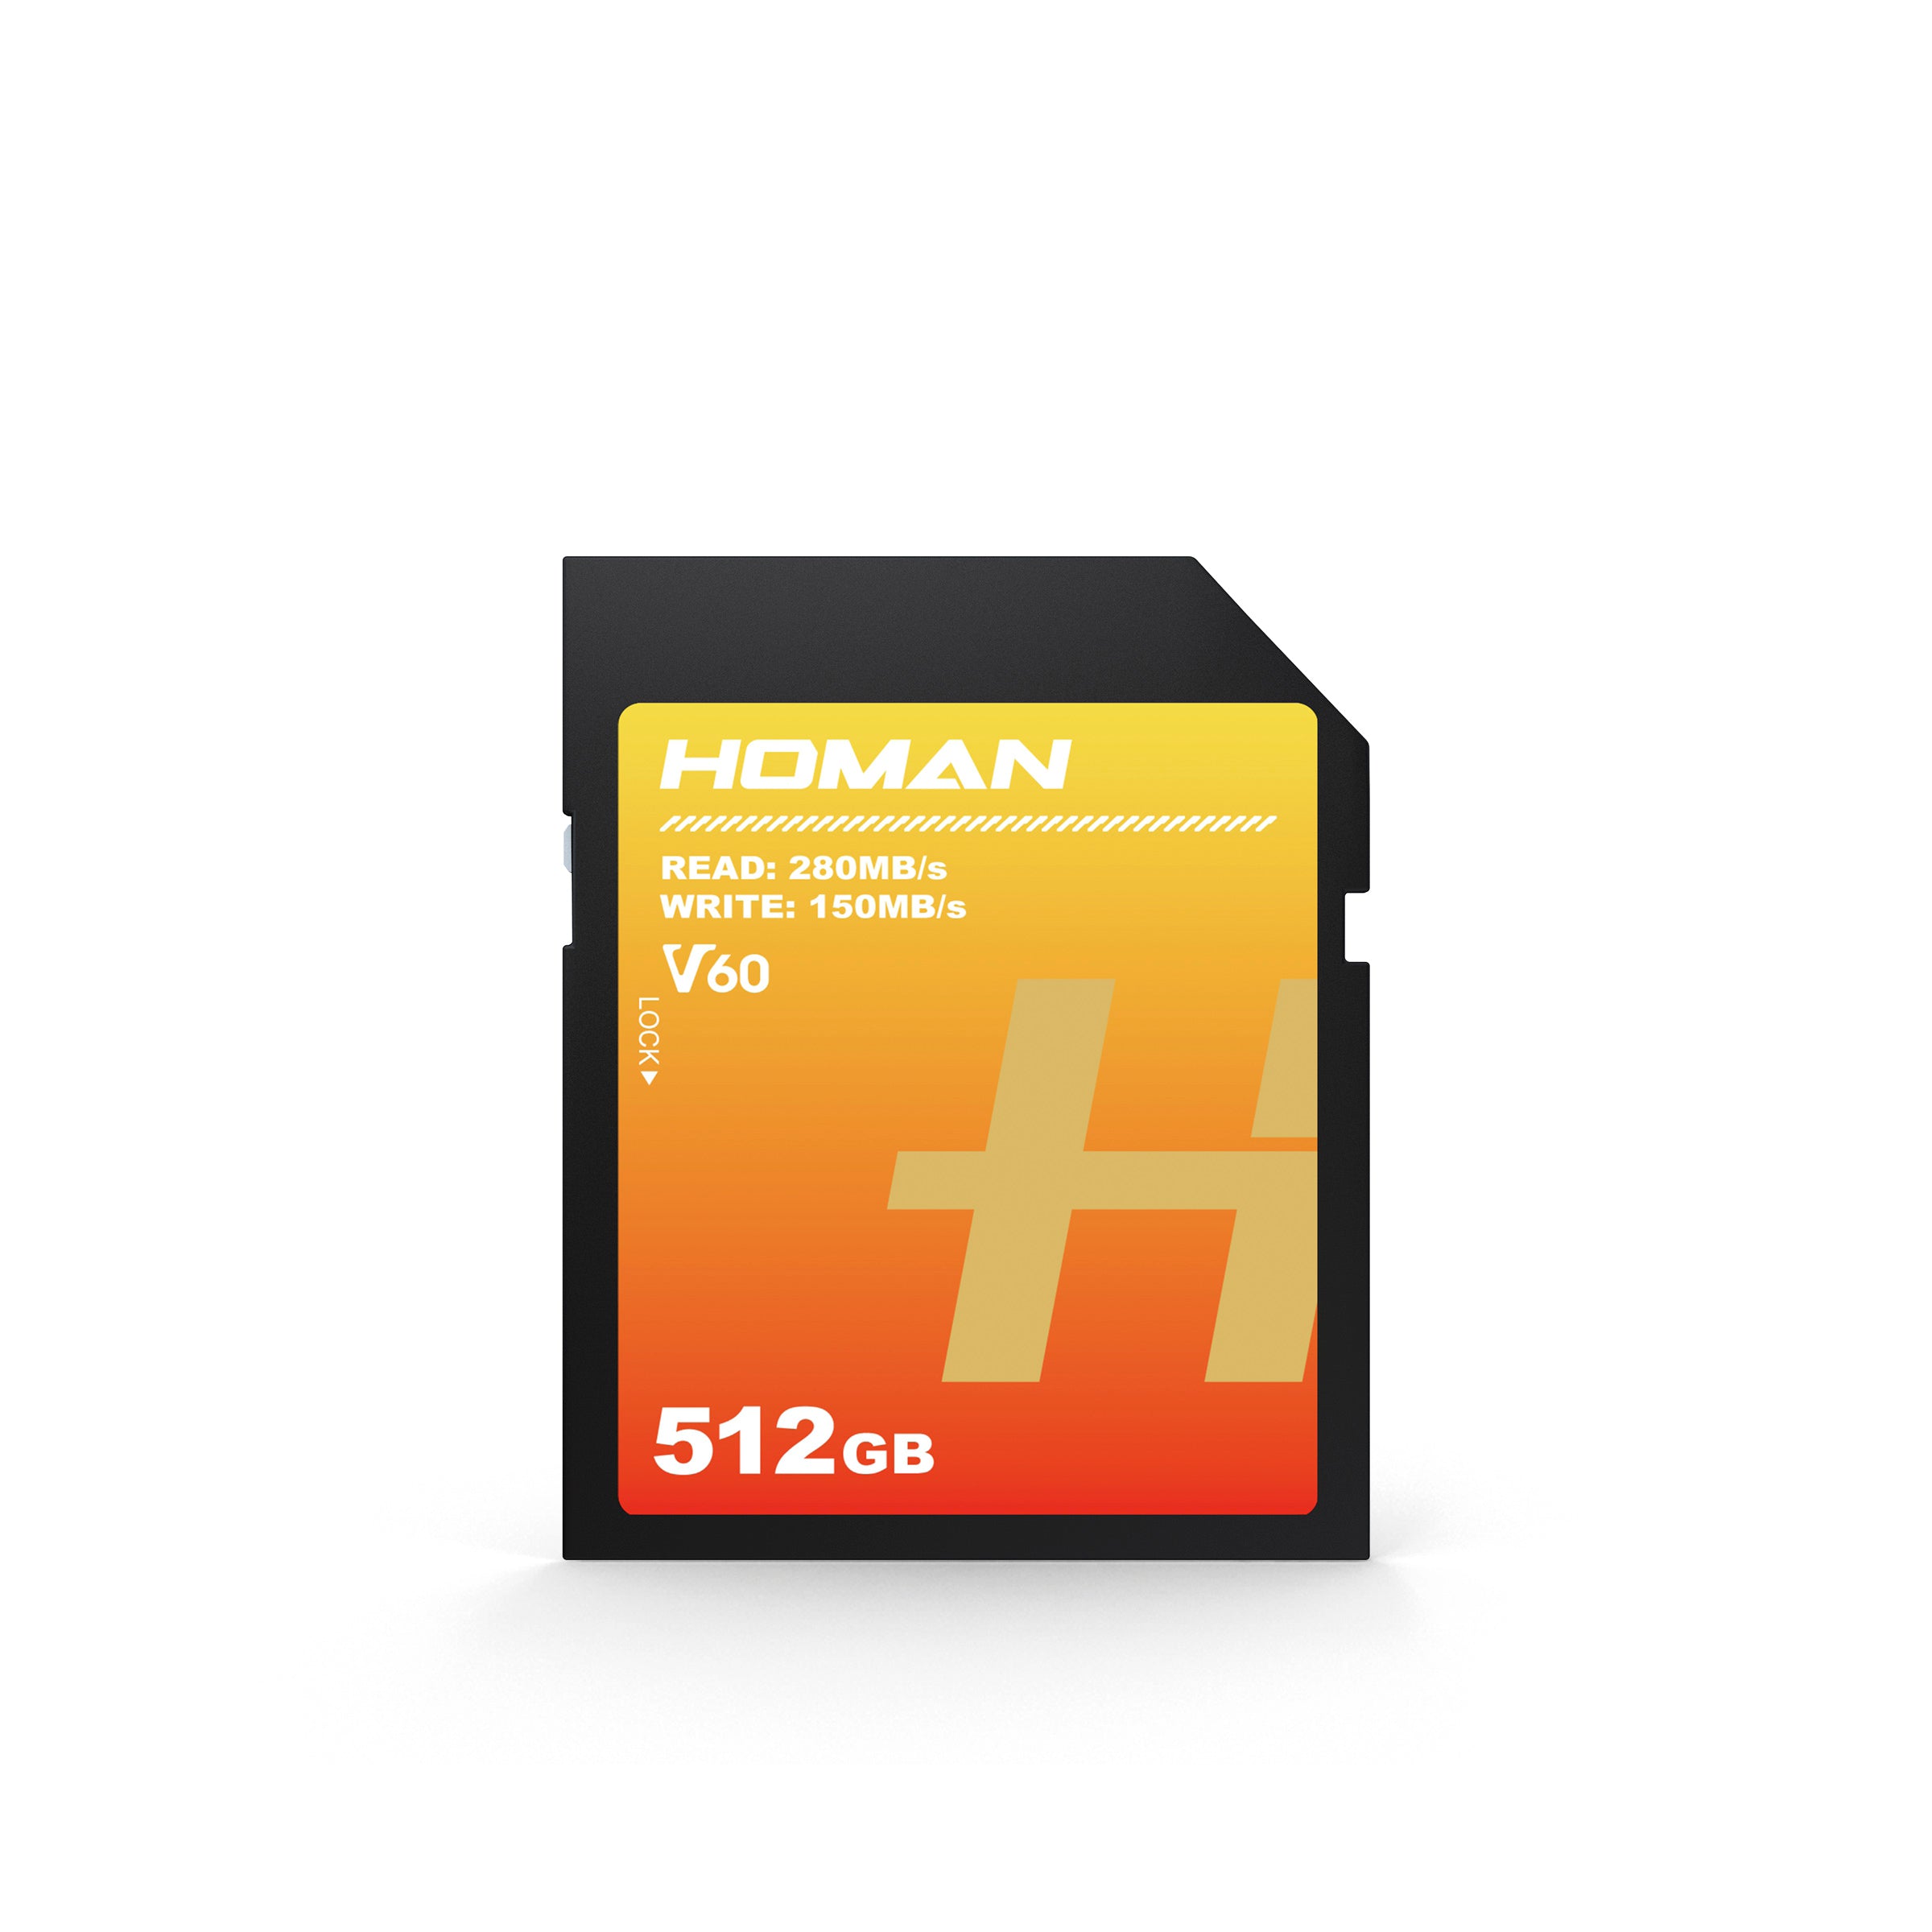 HOMAN UHS-II SD Card (V60) 512GB fit for Any Environmental Temperature from -10 Degree to 70 Degree Celsius with 5 Year Warranty & Recovery